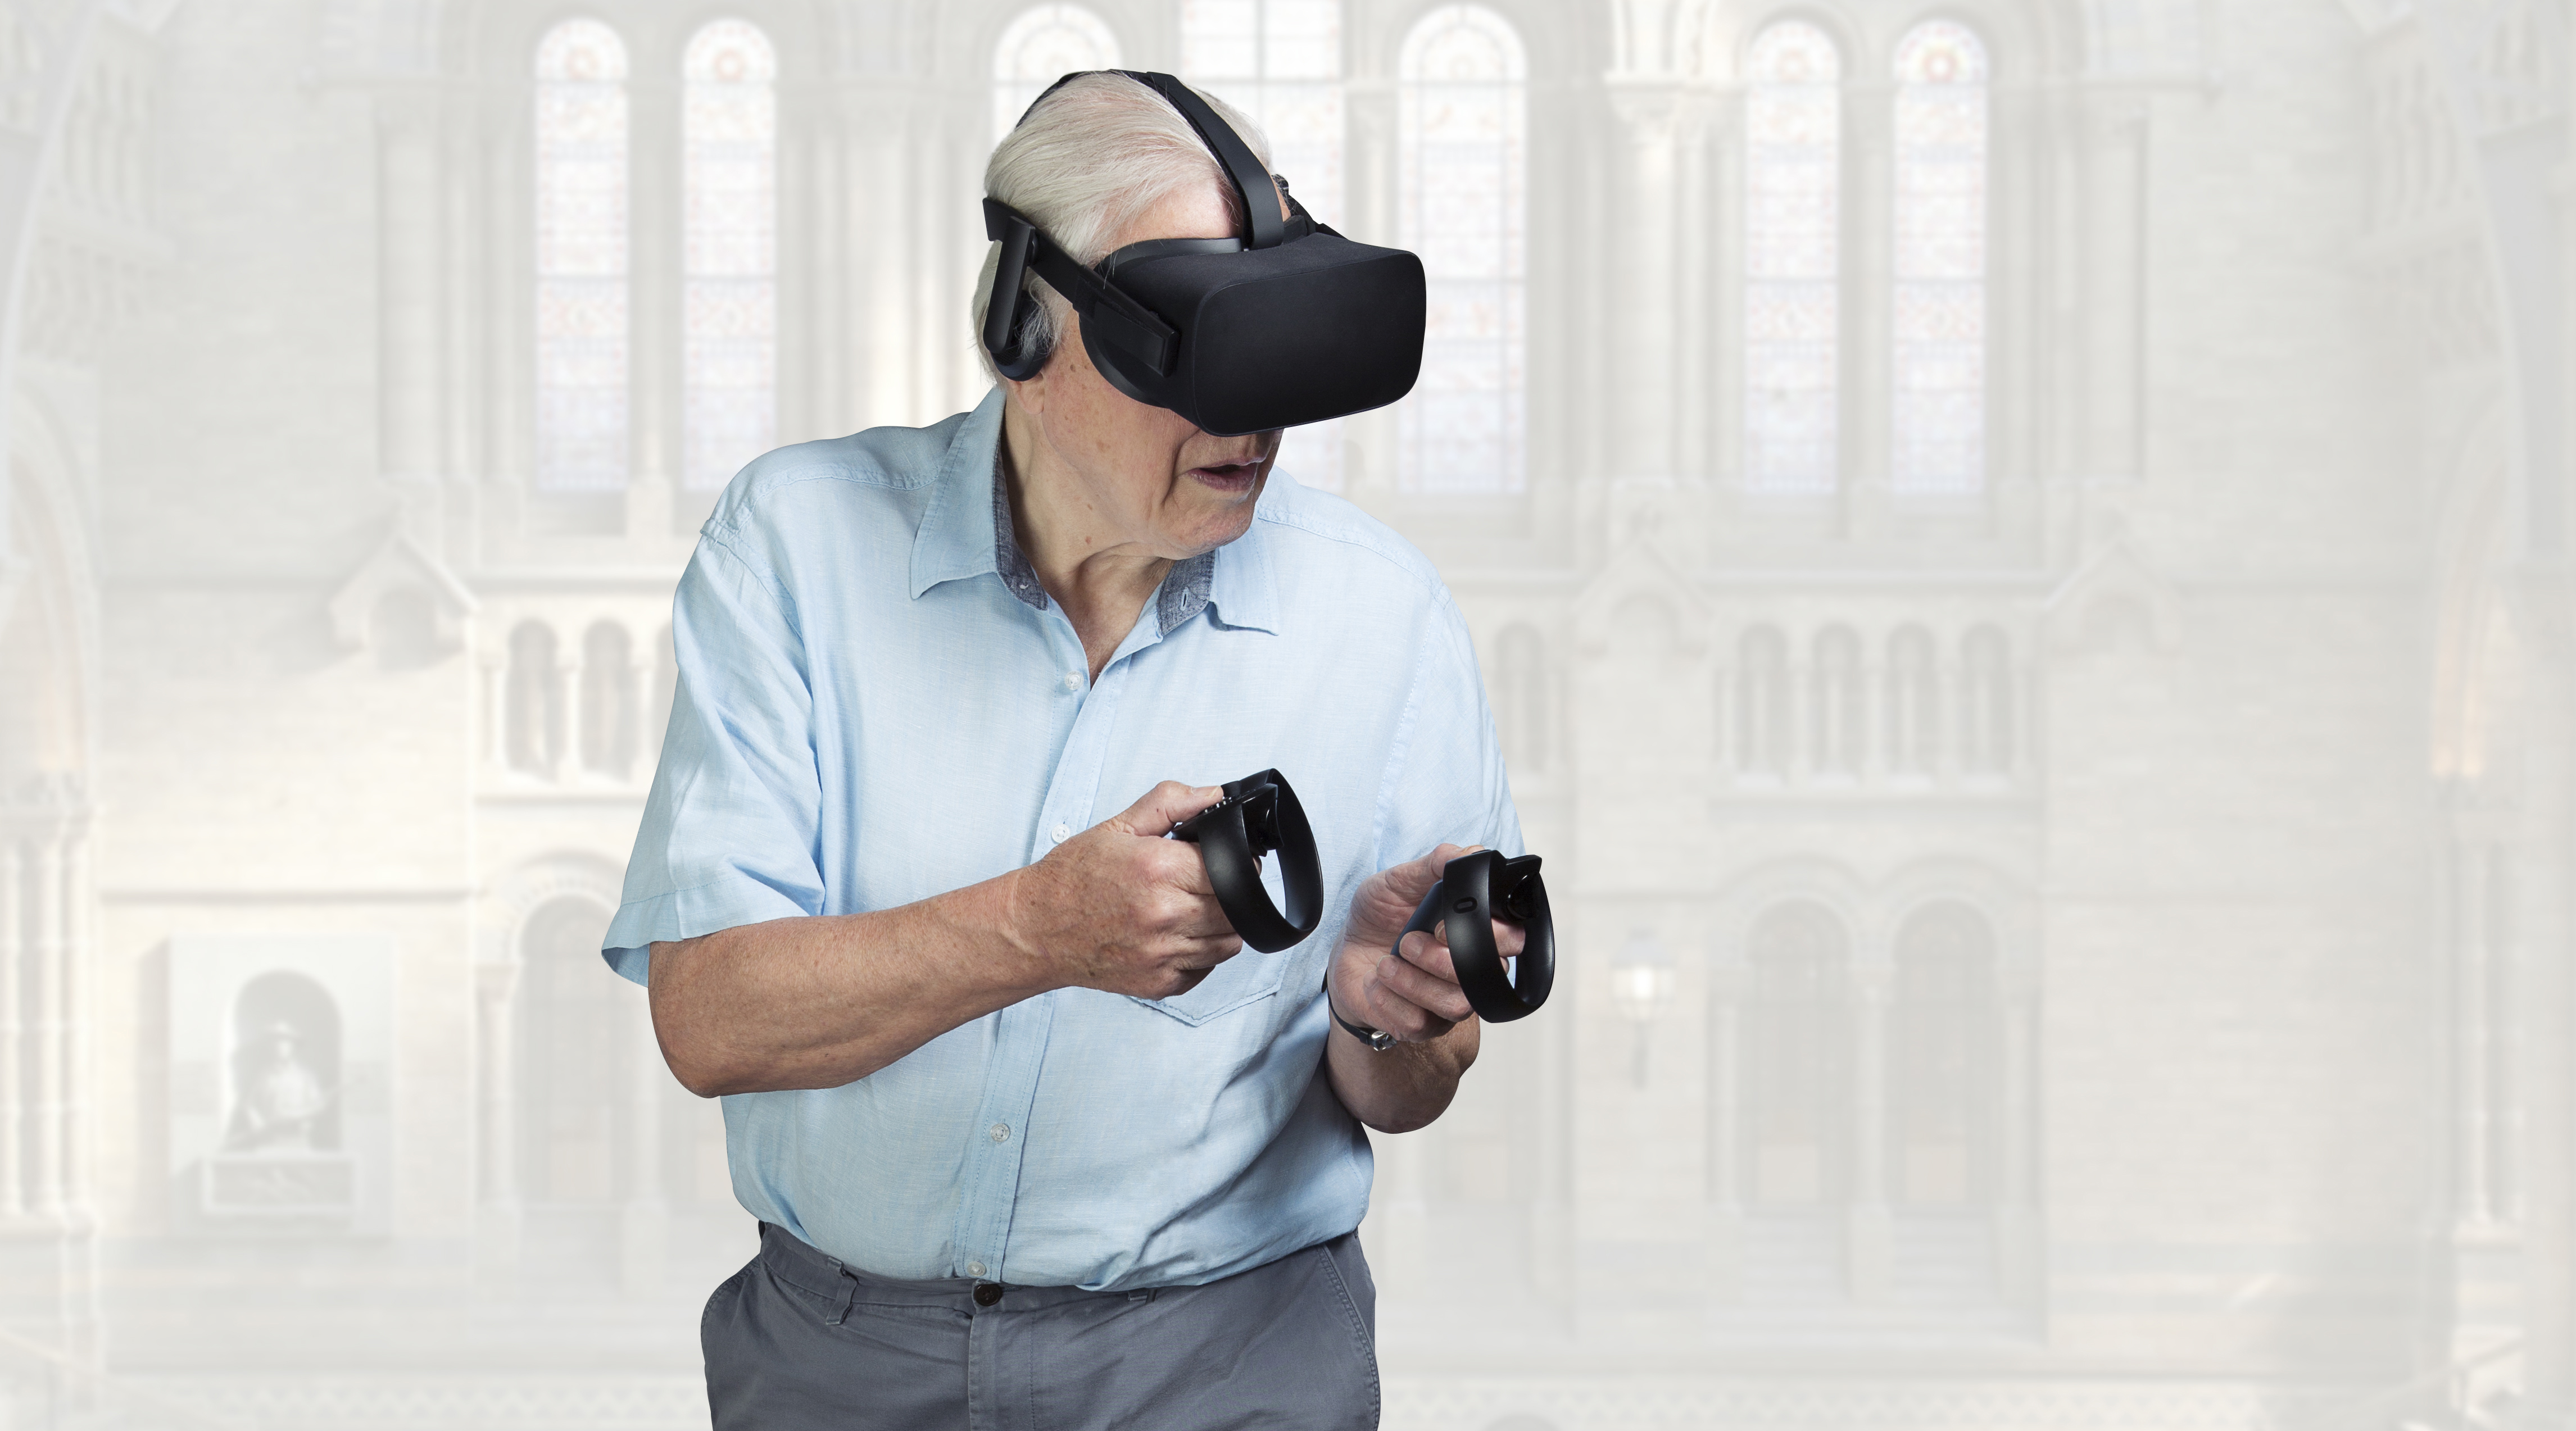 Sir David Attenborough hopes the natural history museum vr app will allow people access that wouldn’t otherwise be available in the real world 